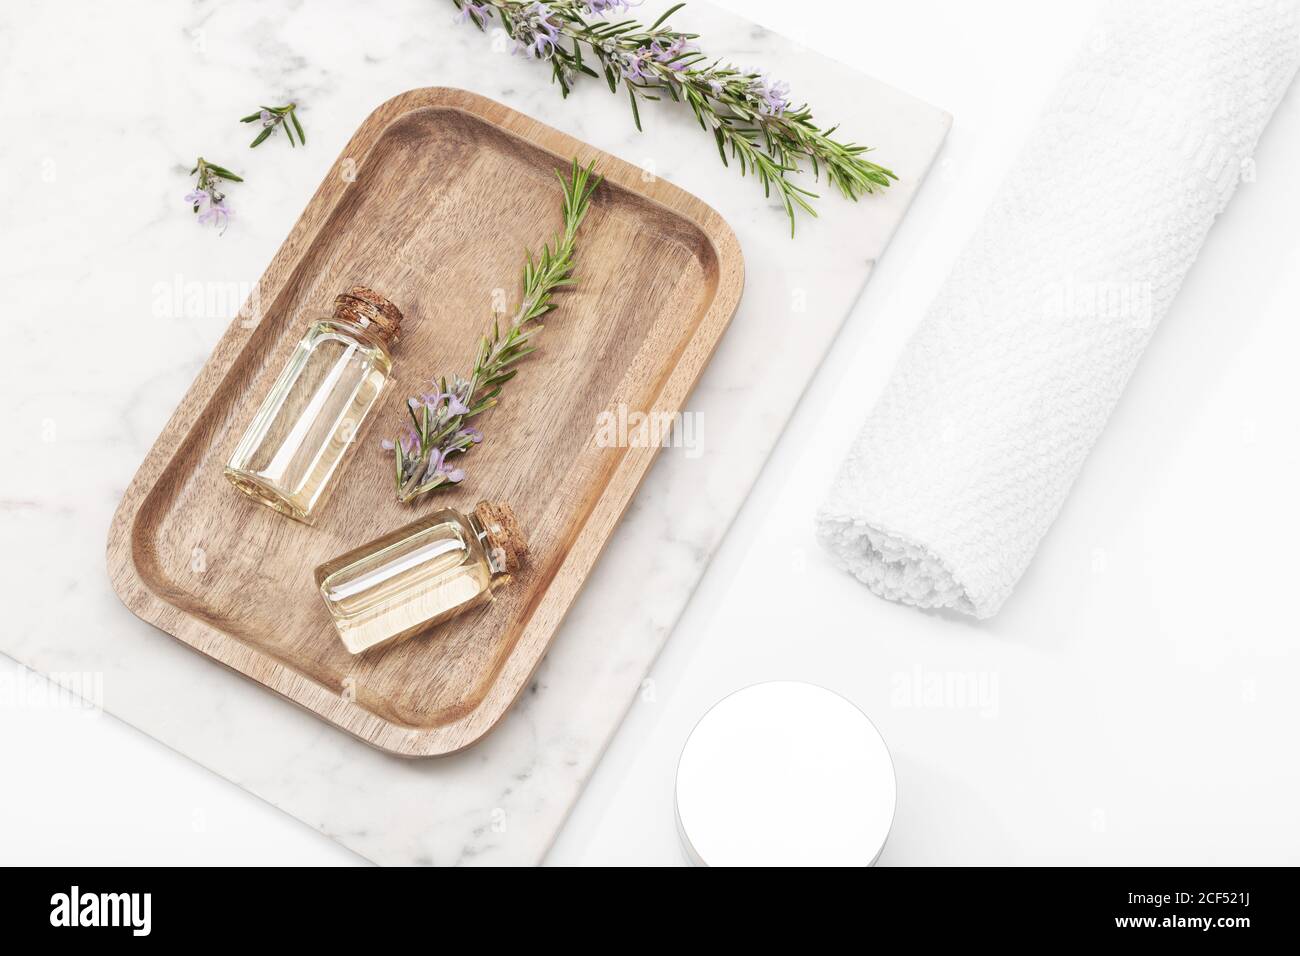 Rosemary essential oil in glass bottle on wooden tray. Salvia Rosmarinus oil Stock Photo